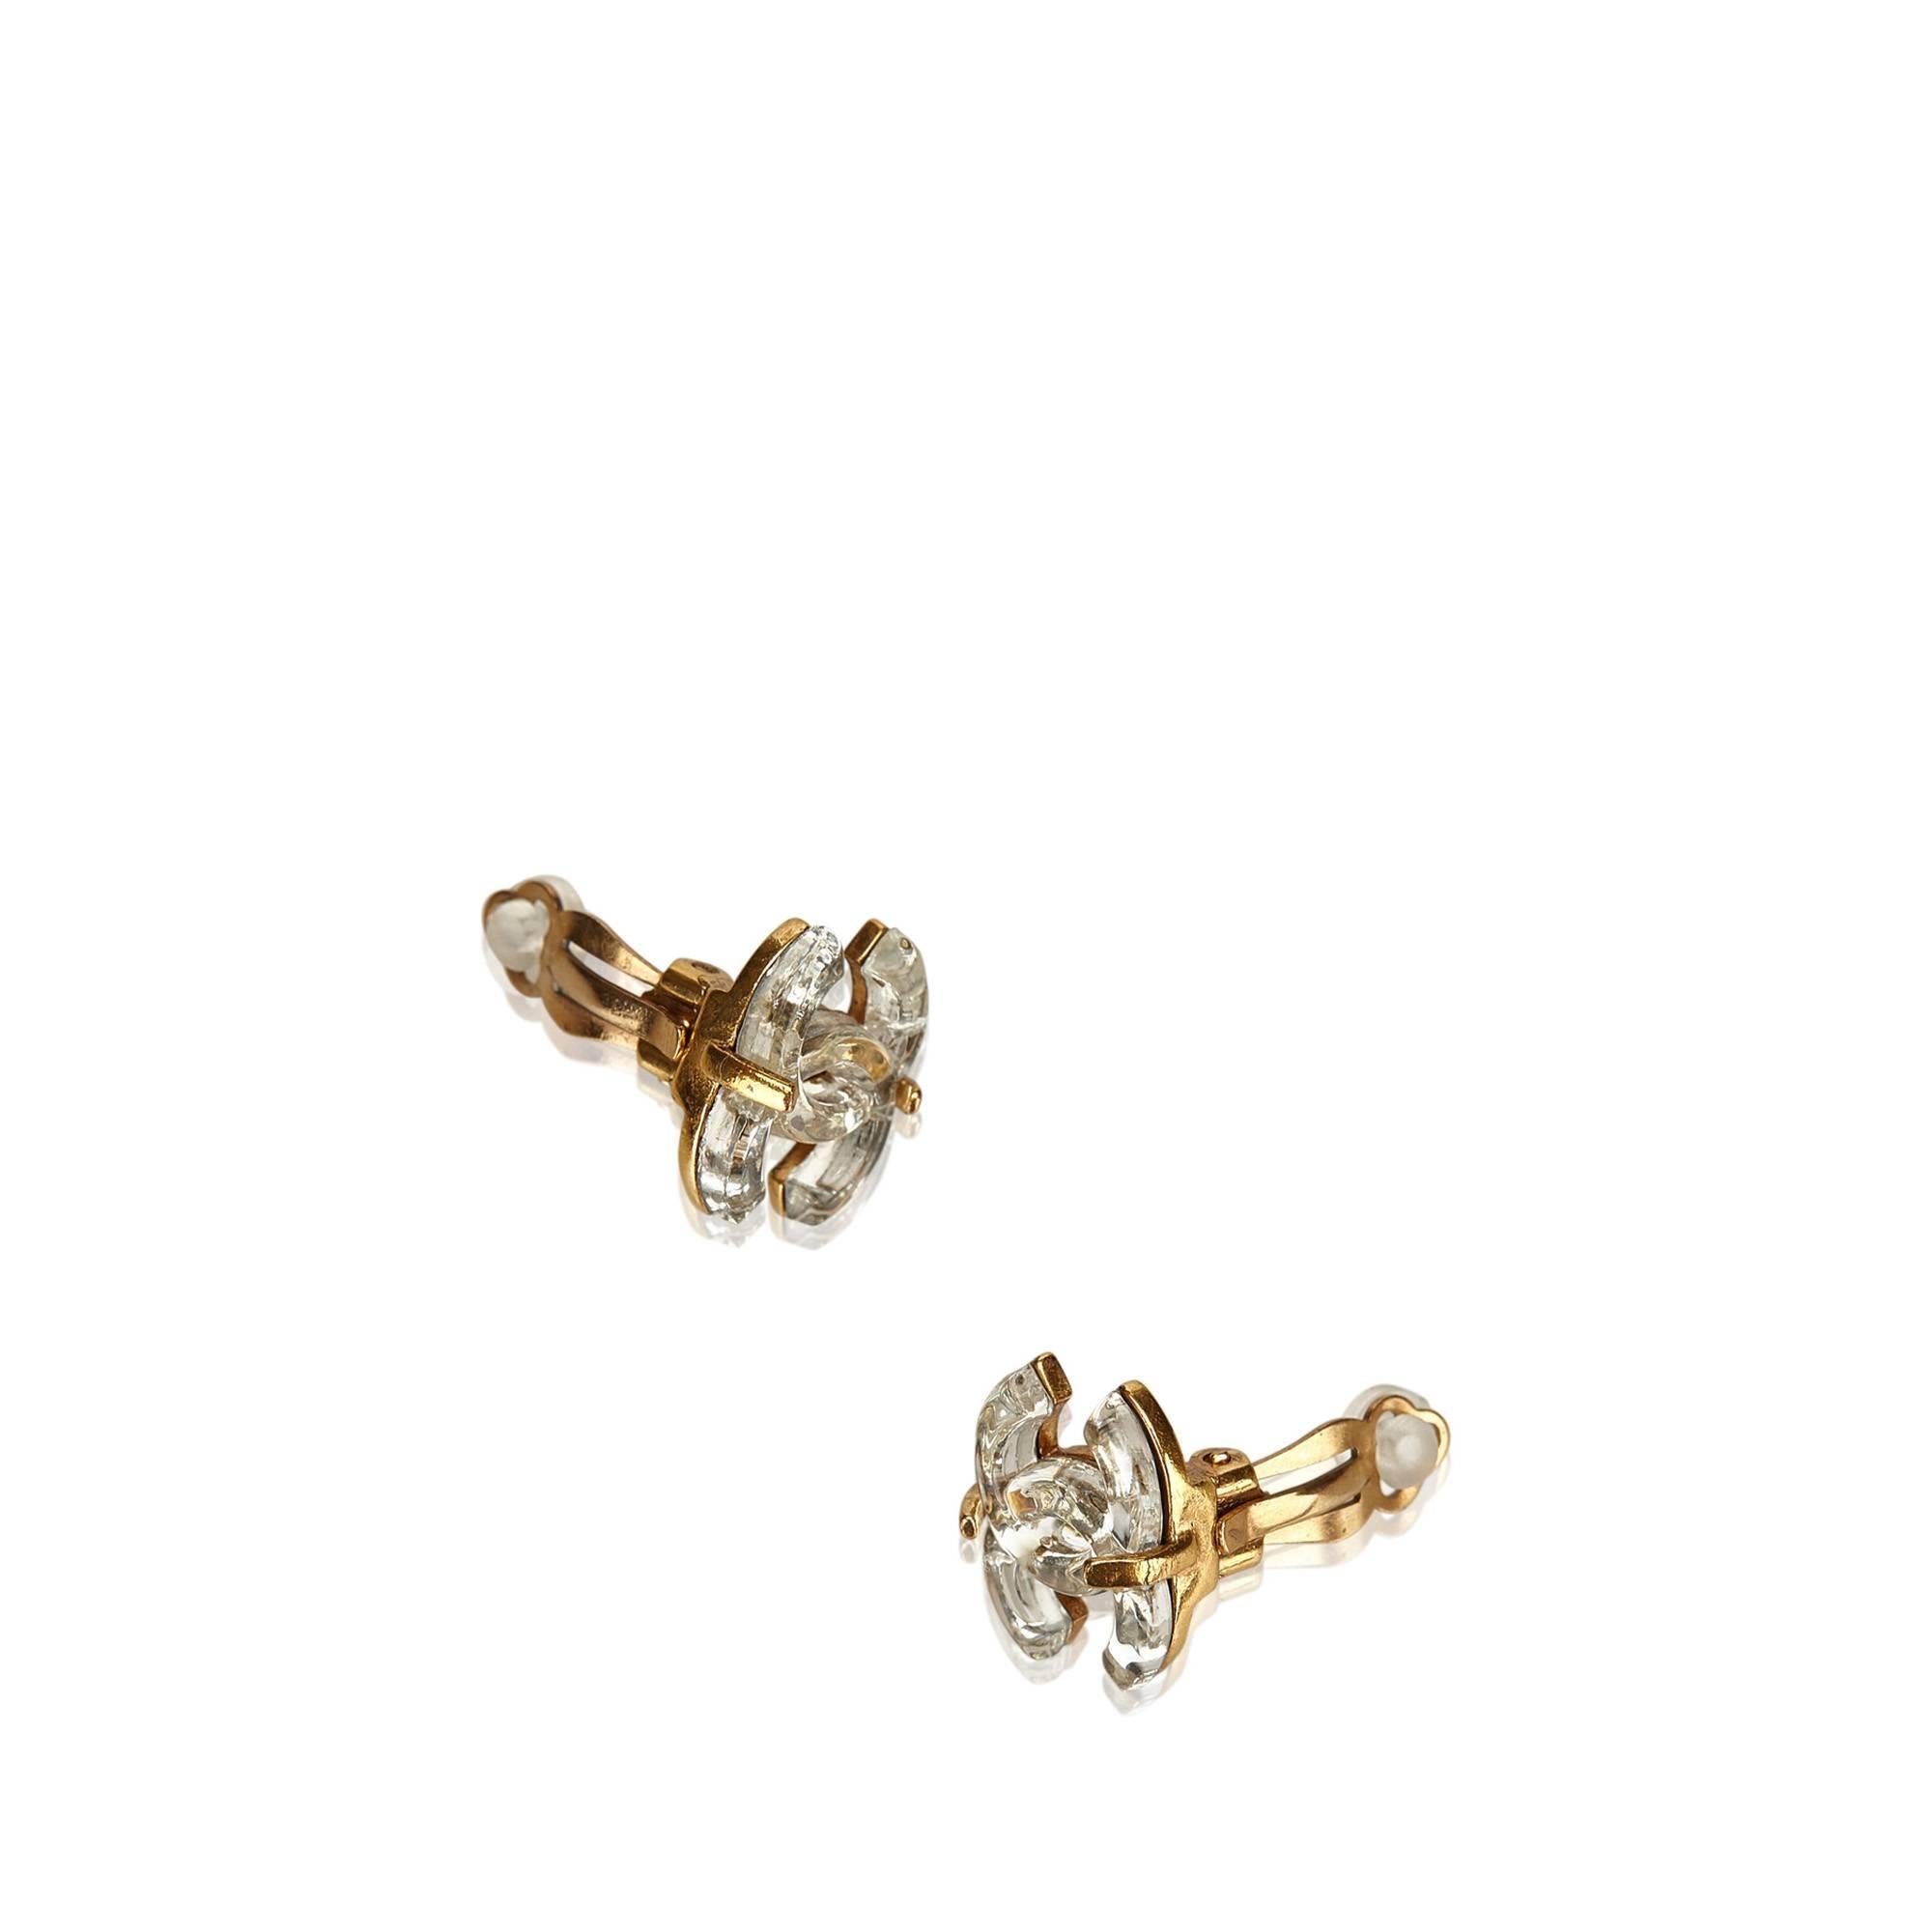 - Thes Chanel earrings feature a gold-toned metal hardware with silver 